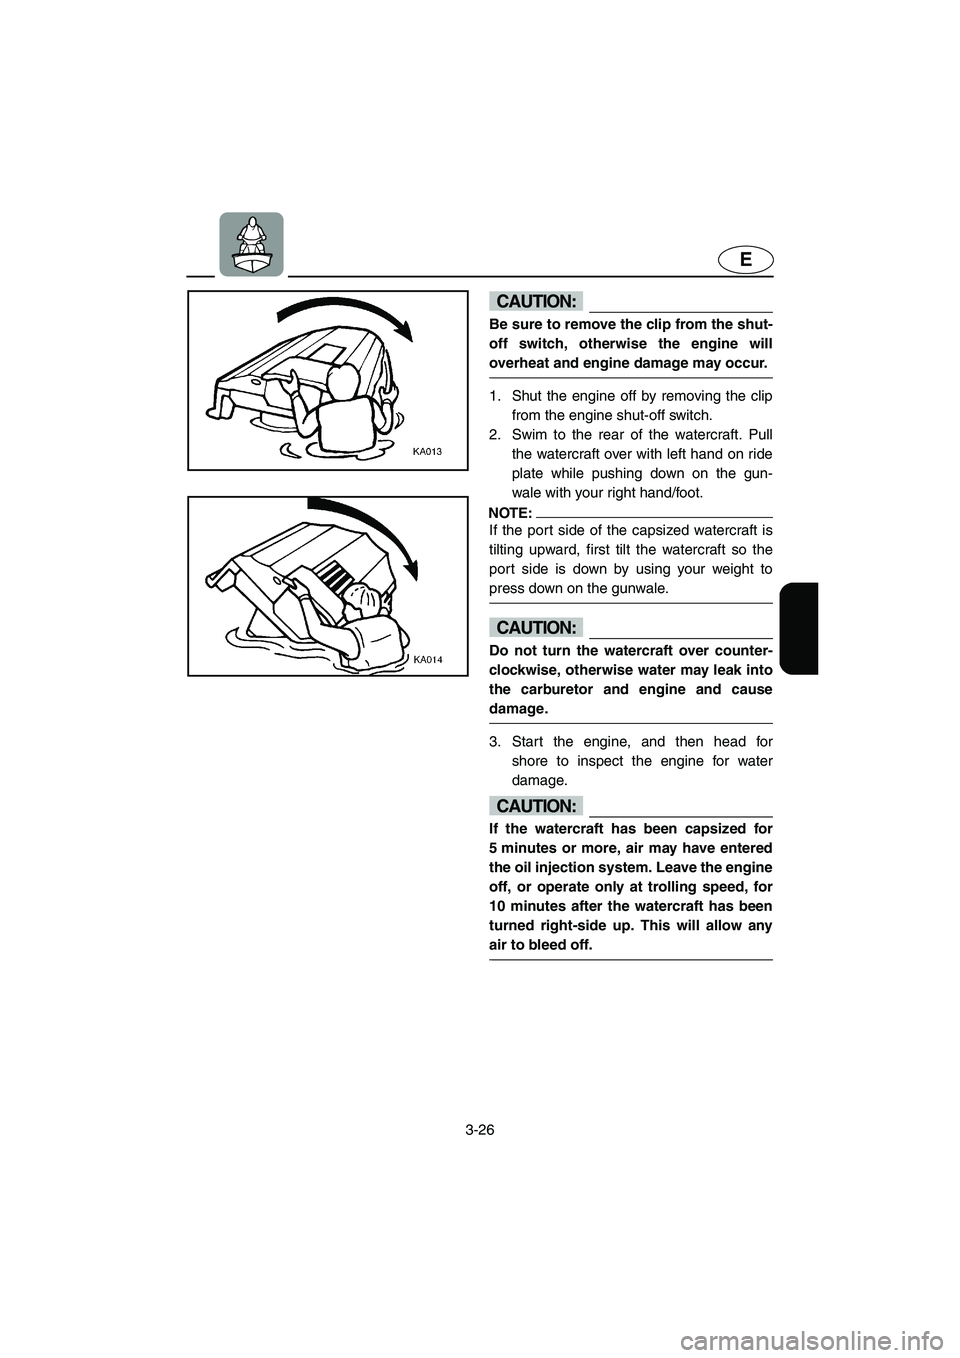 YAMAHA GP800R 2002  Owners Manual 3-26
E
CAUTION:@ Be sure to remove the clip from the shut-
off switch, otherwise the engine will
overheat and engine damage may occur. 
@ 
1. Shut the engine off by removing the clip
from the engine s